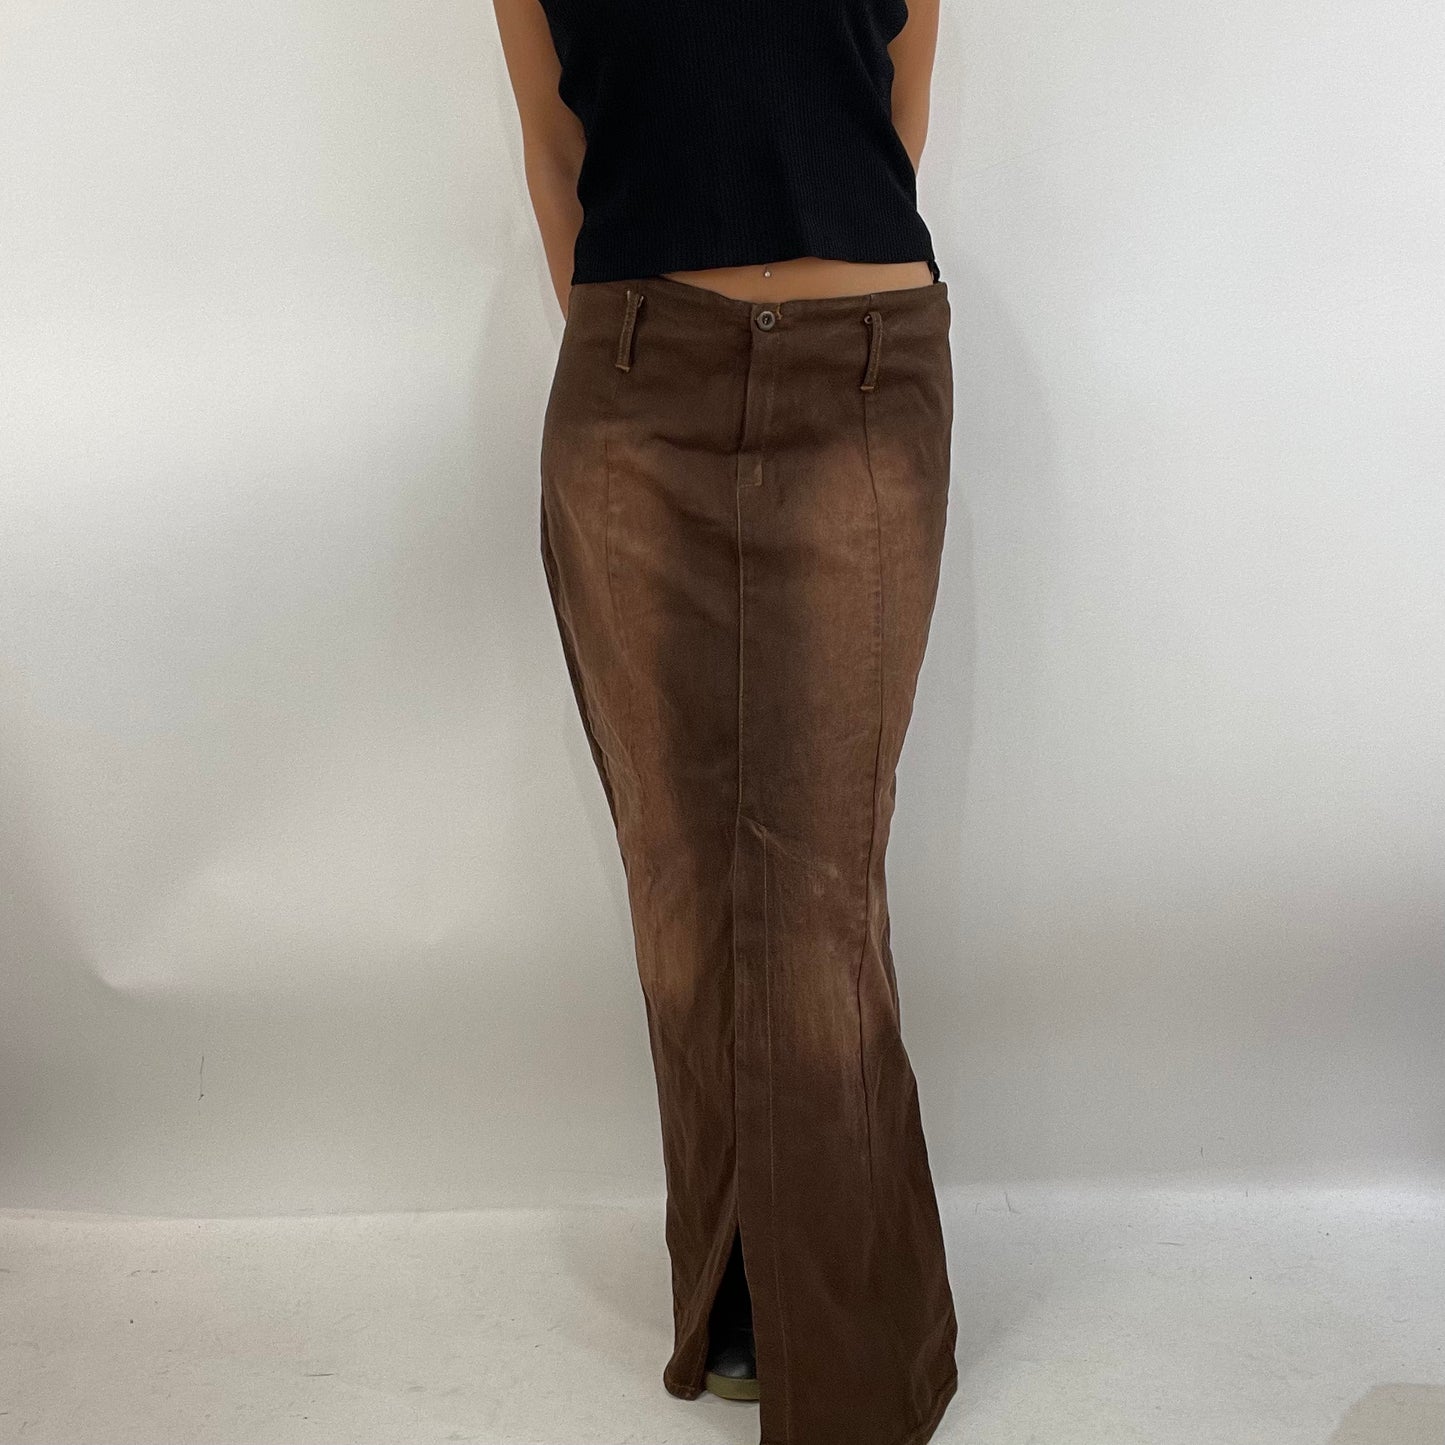 💻 MODEL OFF DUTY DROP | small brown maxi skirt with wash out effect